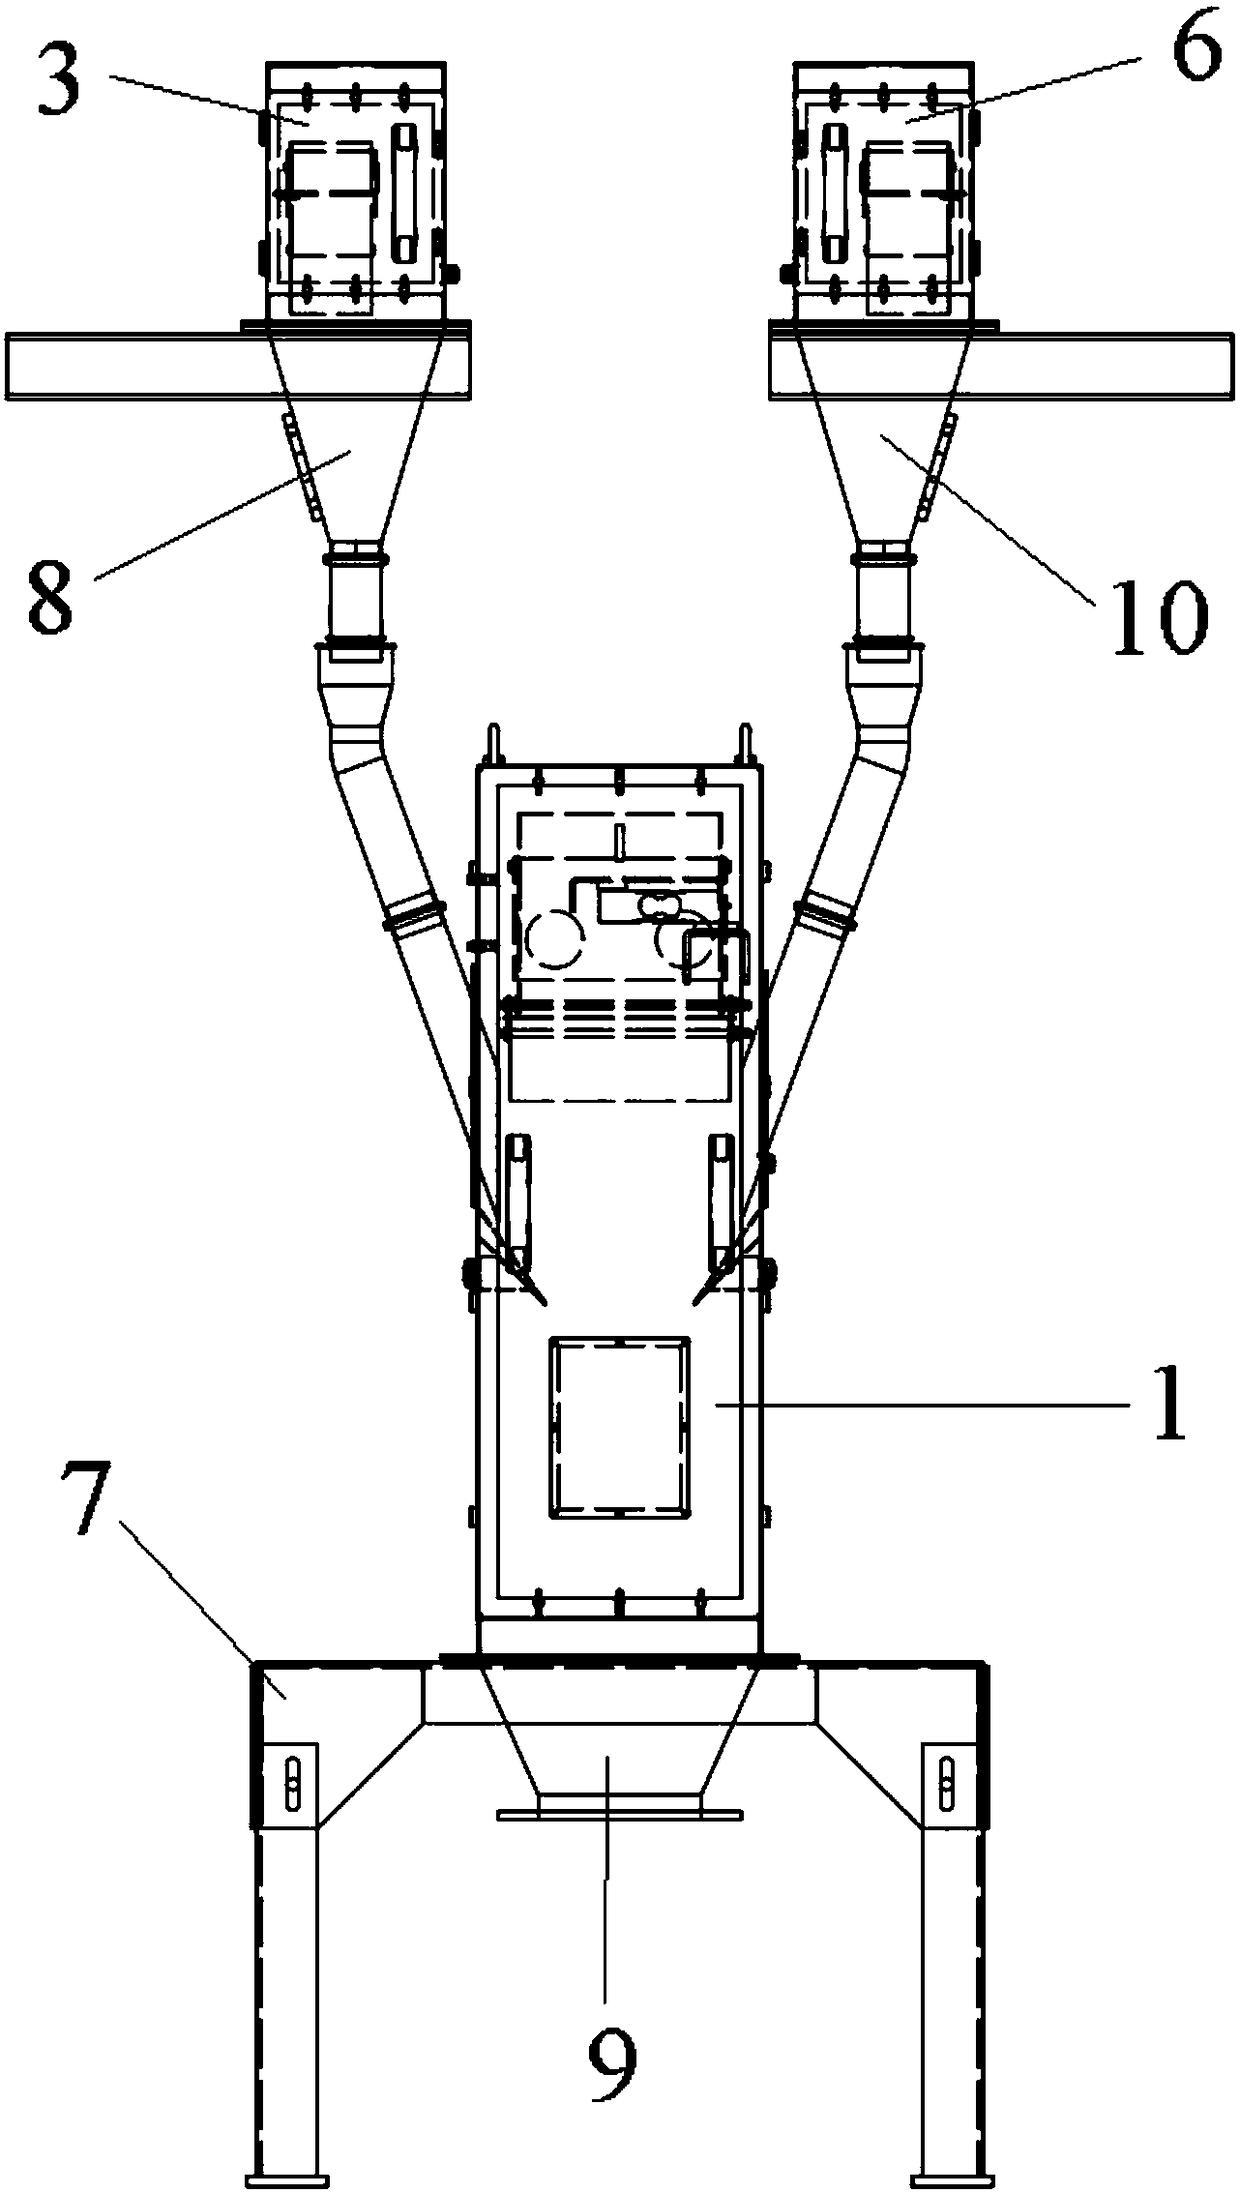 Mixing and metering device